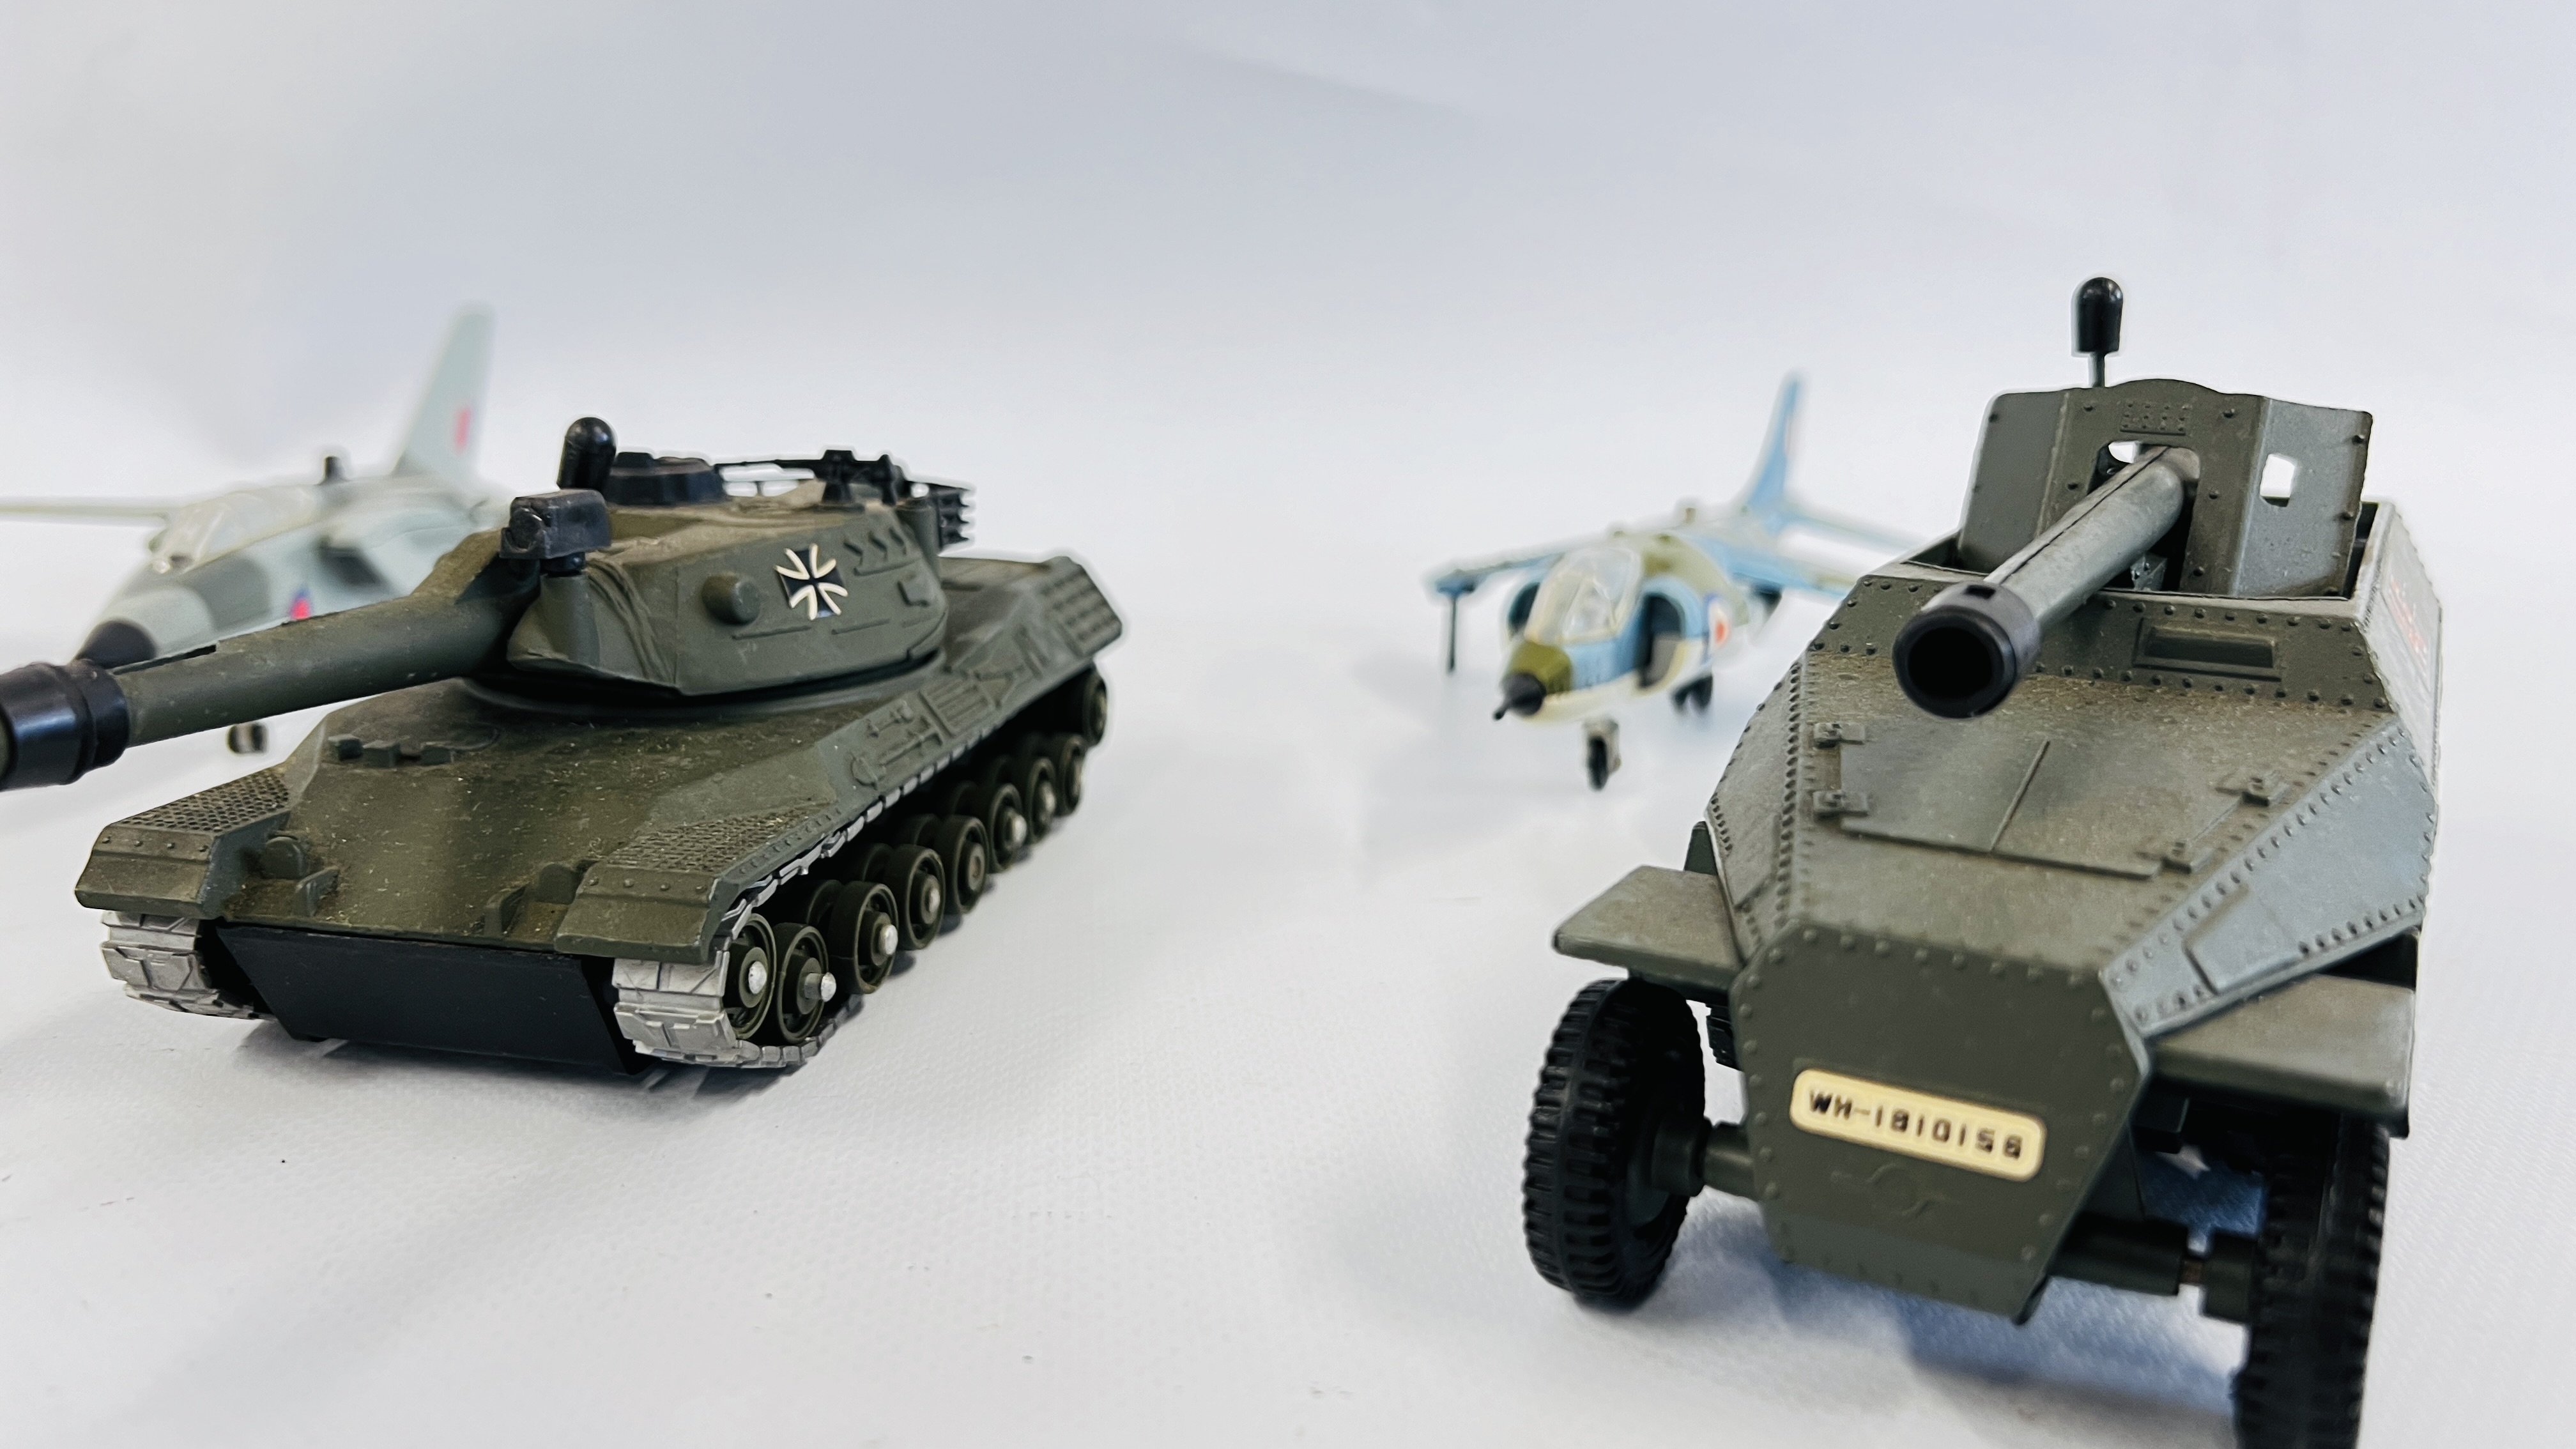 A GROUP OF 4 X DIE-CAST MILITARY DINKY TANKS ALONG WITH 4 X DIE-CAST DINKY FIGHTER PLANES / JETS. - Image 3 of 8